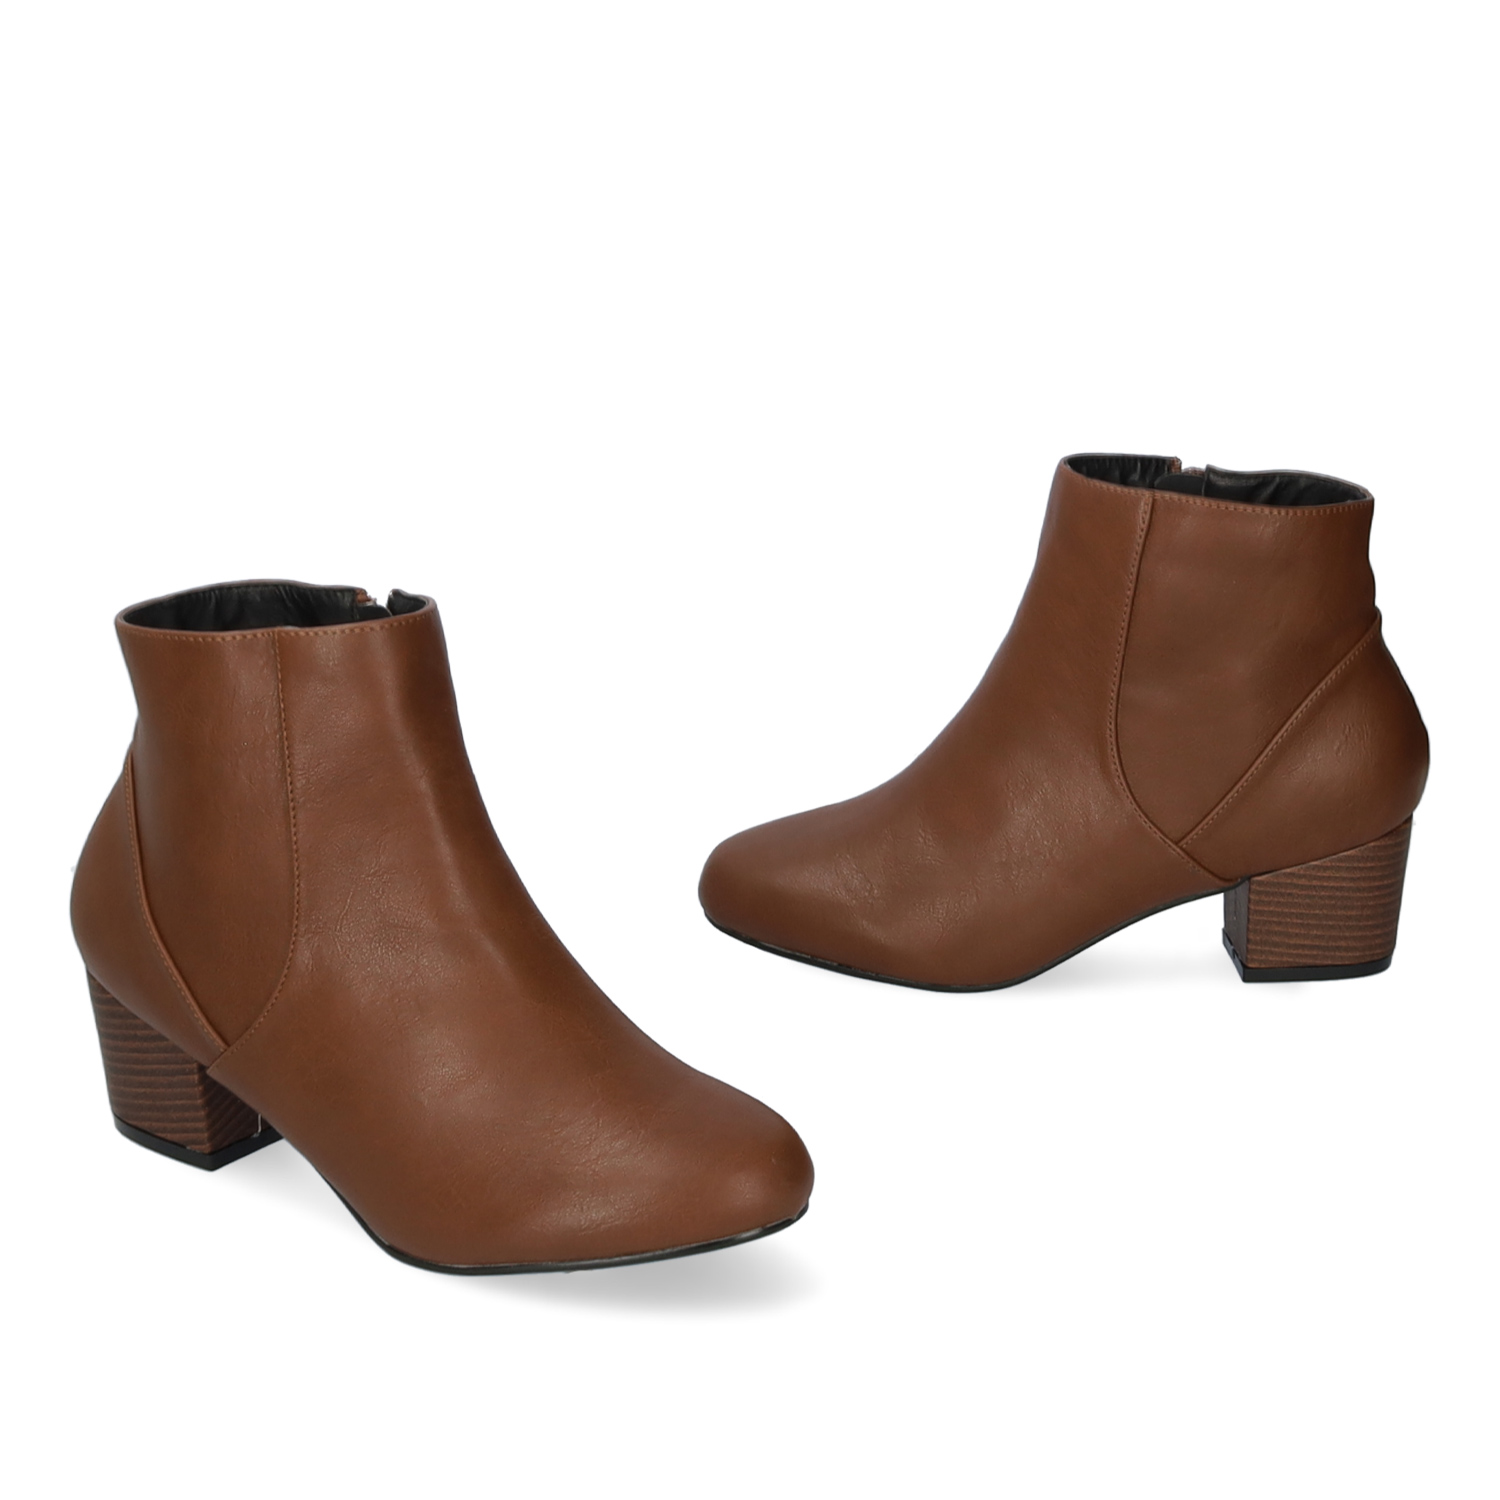 Heeled booties in brown faux leather 